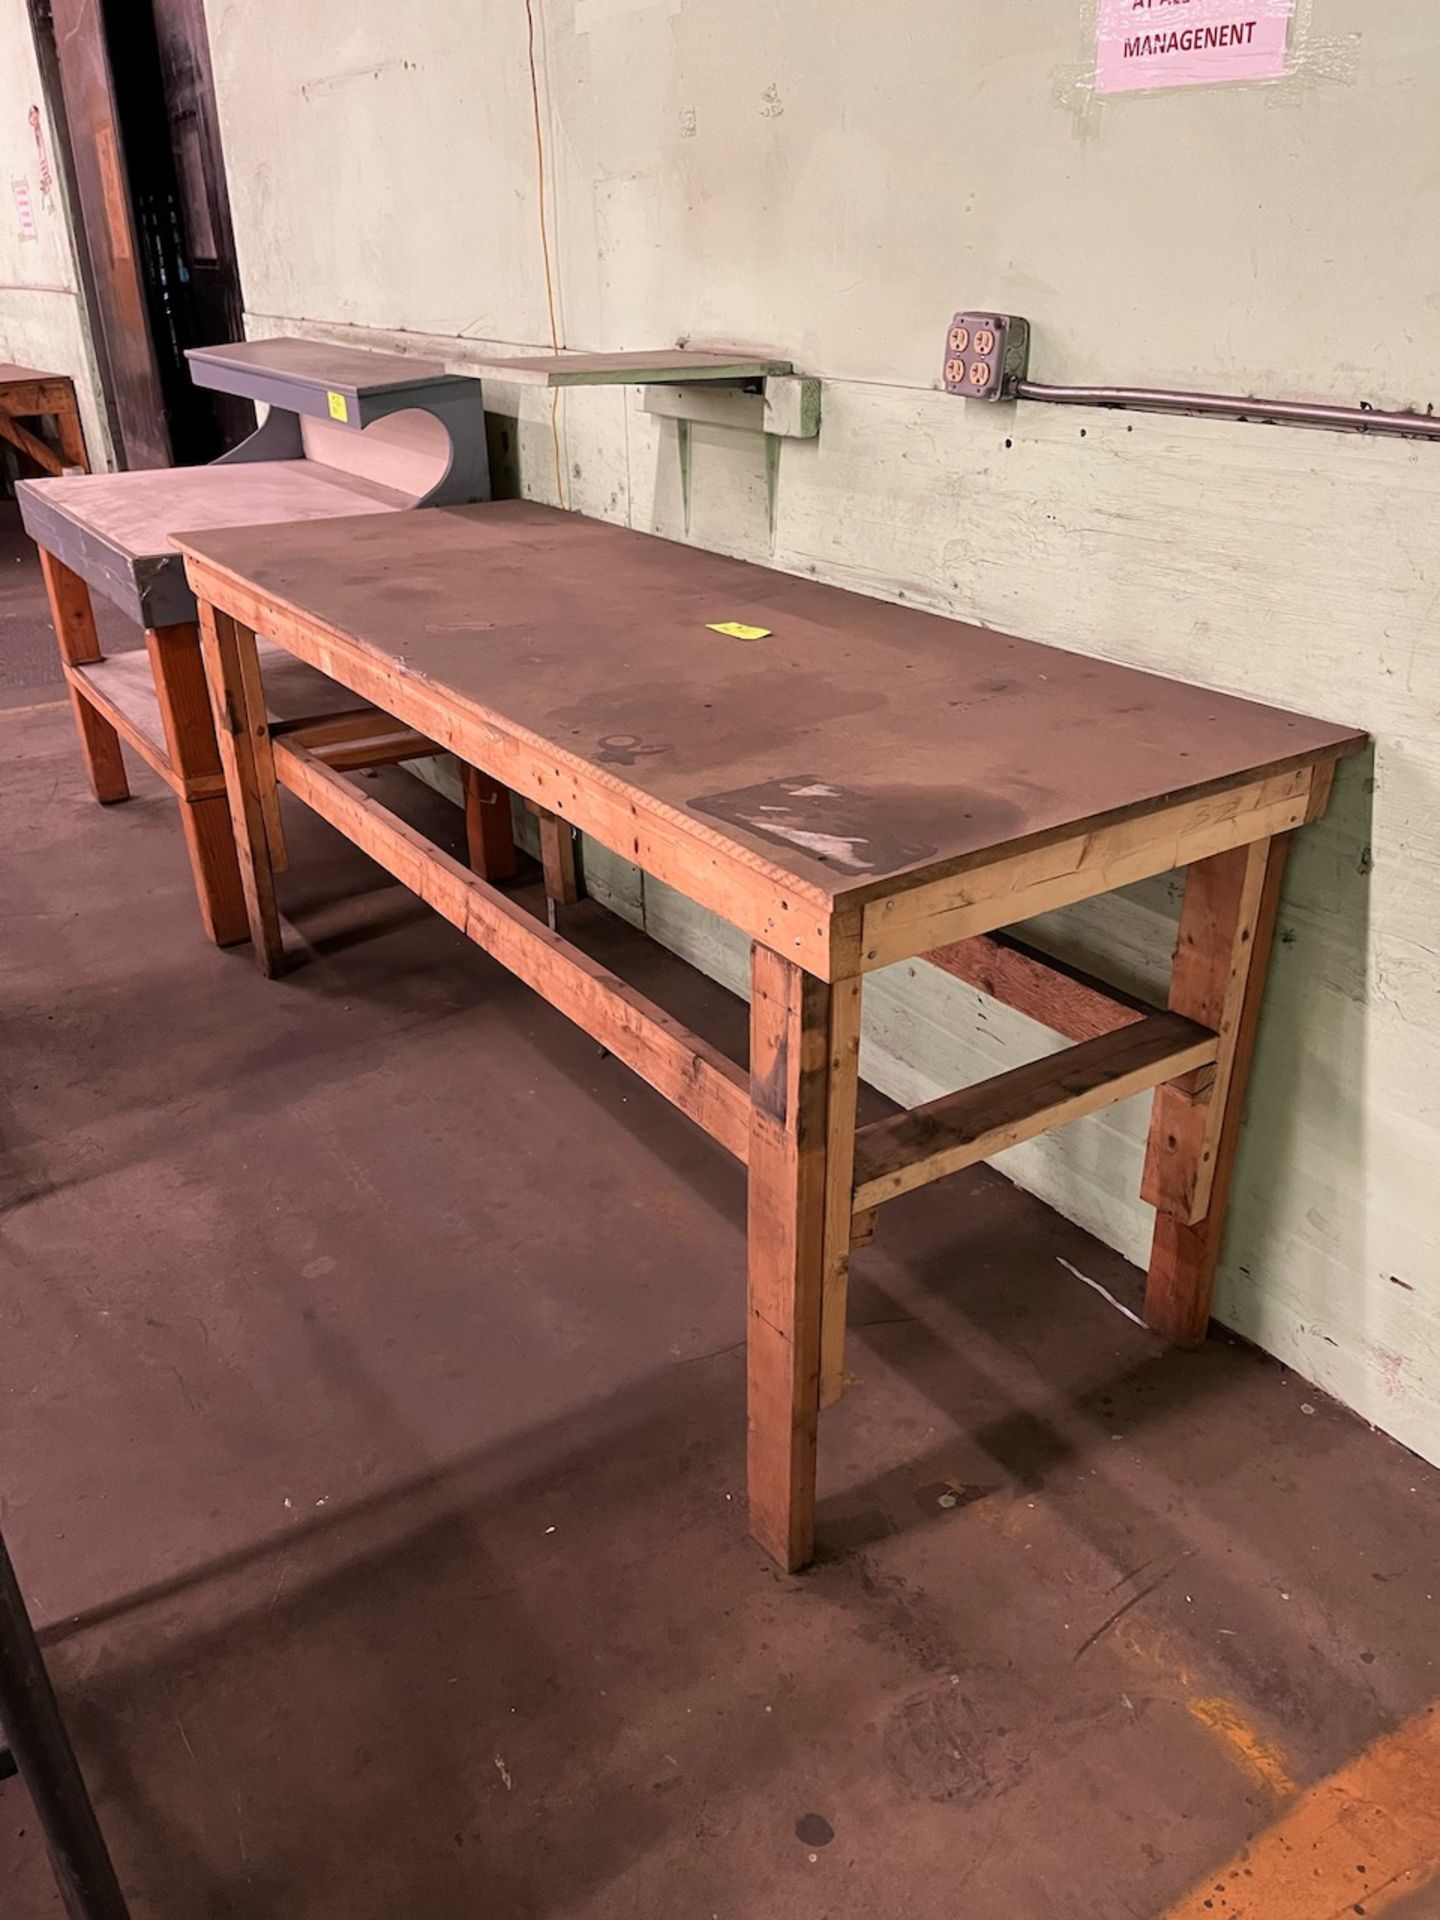 Wooden work table 30.5" x 84" - Image 2 of 2